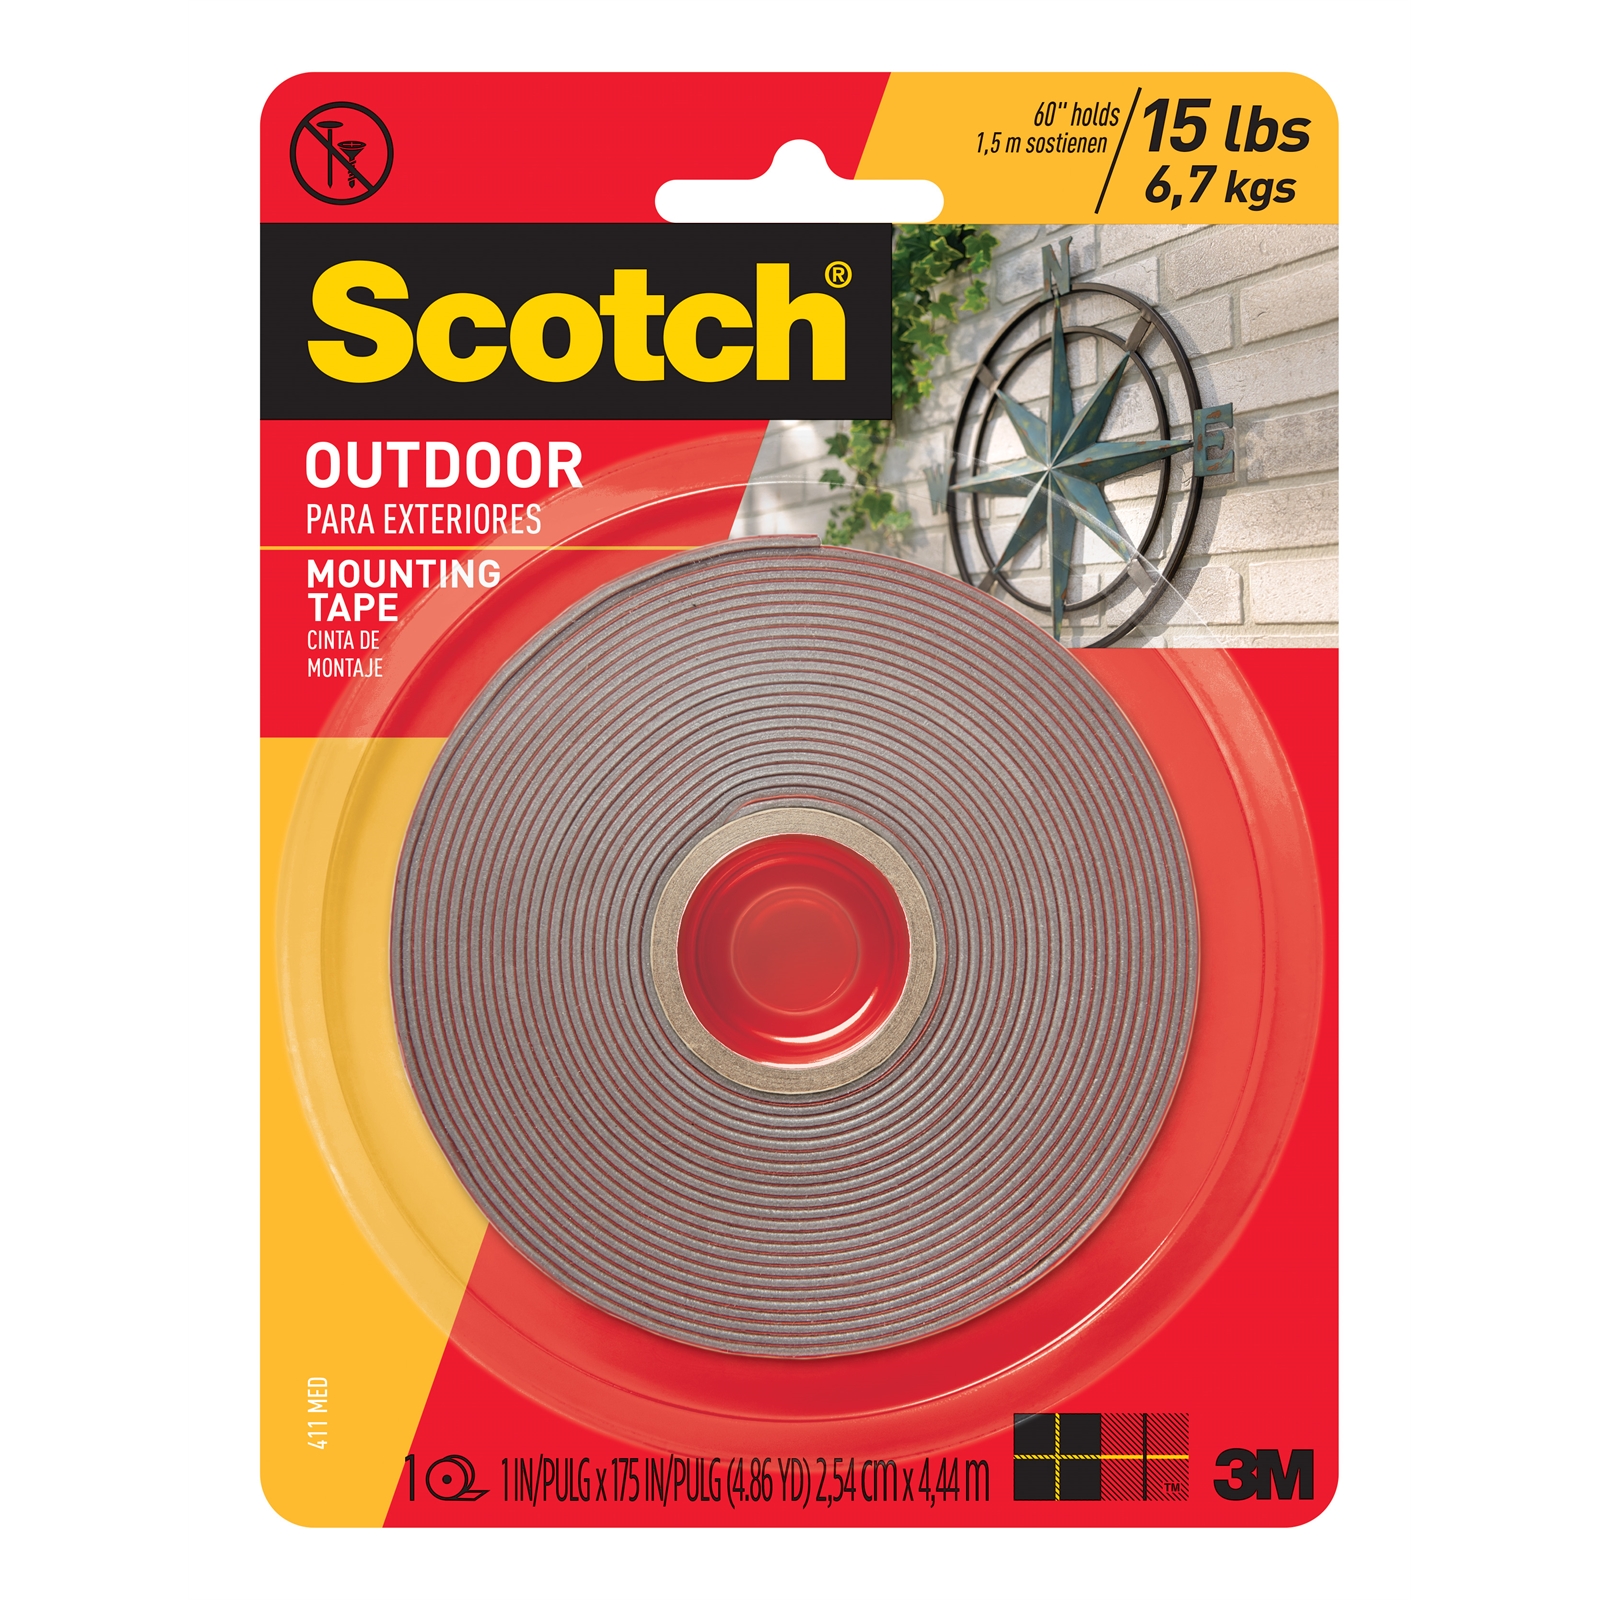 Scotch 2.5cm x 4.4m Outdoor Mounting Tape